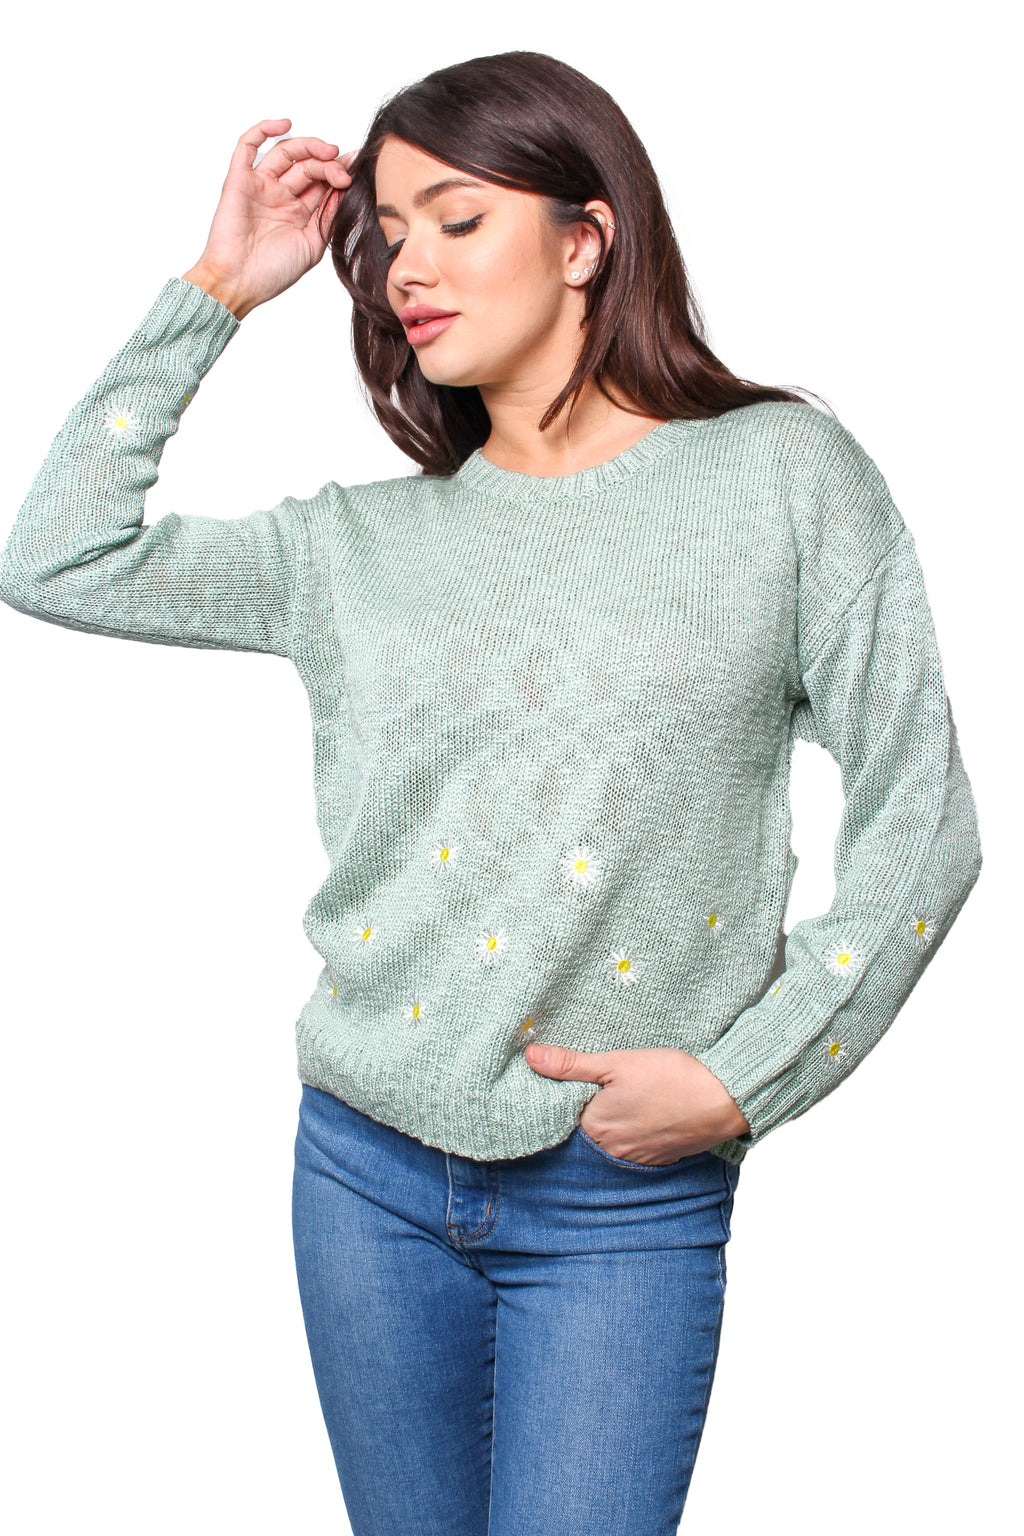 Women's Long Sleeves Crew Neck Daisy Print Knitted Top